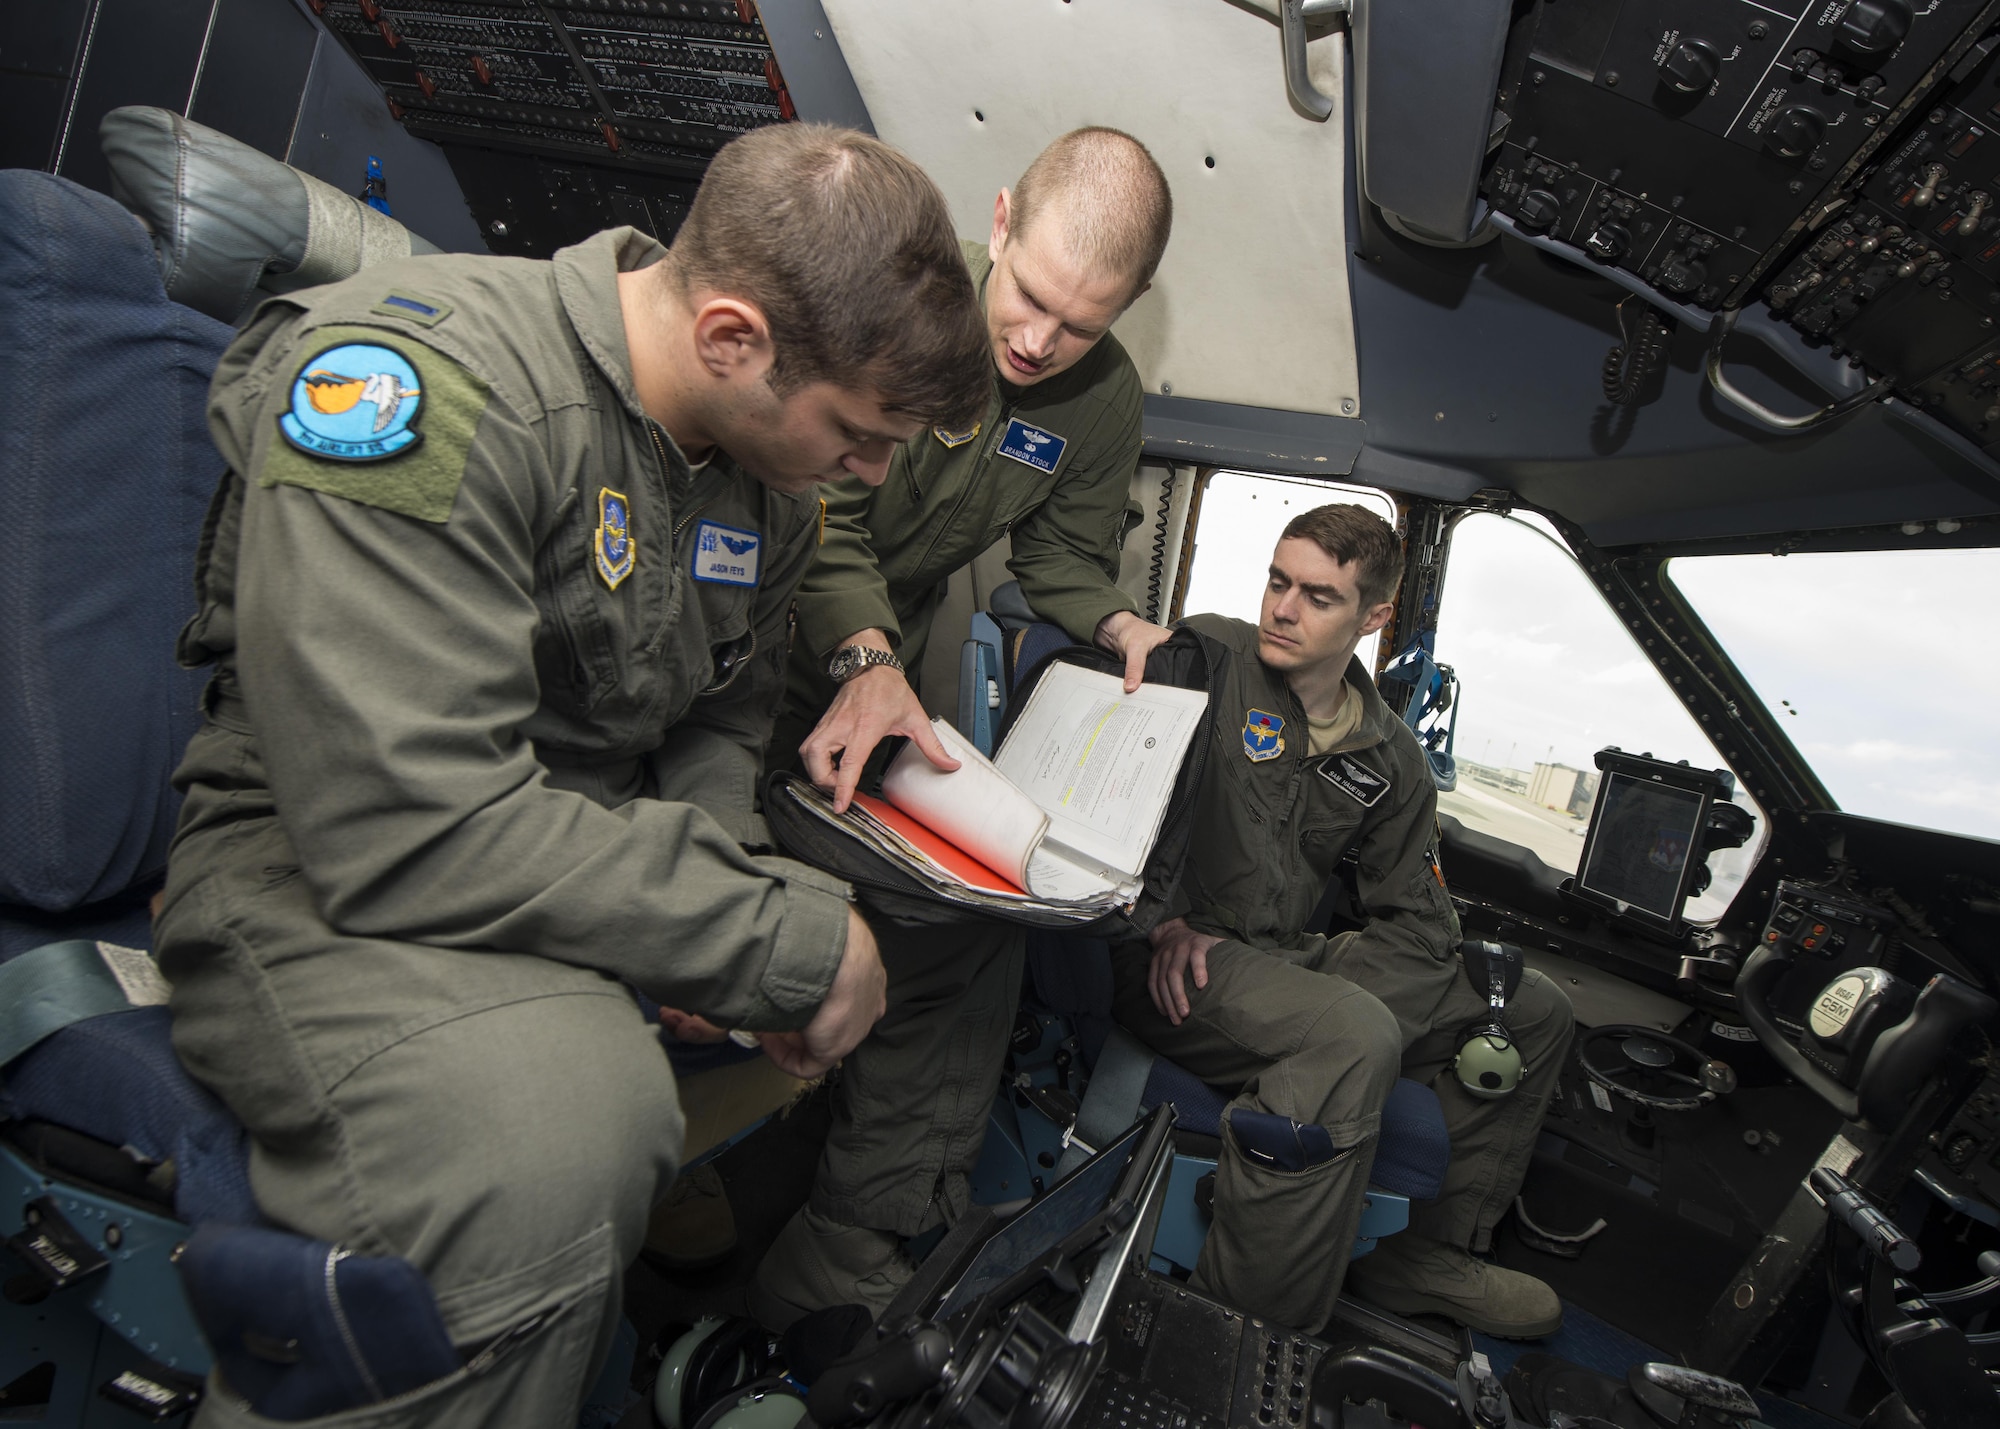 Maj. Brandon Stock, C-5M Formal Training Unit commander, instructs pilot students, 1st Lt. Jason Feys and 1st Lt. Sam Haueter, during preflight procedures June 8, 2017, inside a C-5M Super Galaxy flight deck on Dover Air Force Base, Del. Feys and Haueter are undergoing C-5M initial pilot qualification training. (U.S. Air Force photo by Senior Airman Zachary Cacicia)